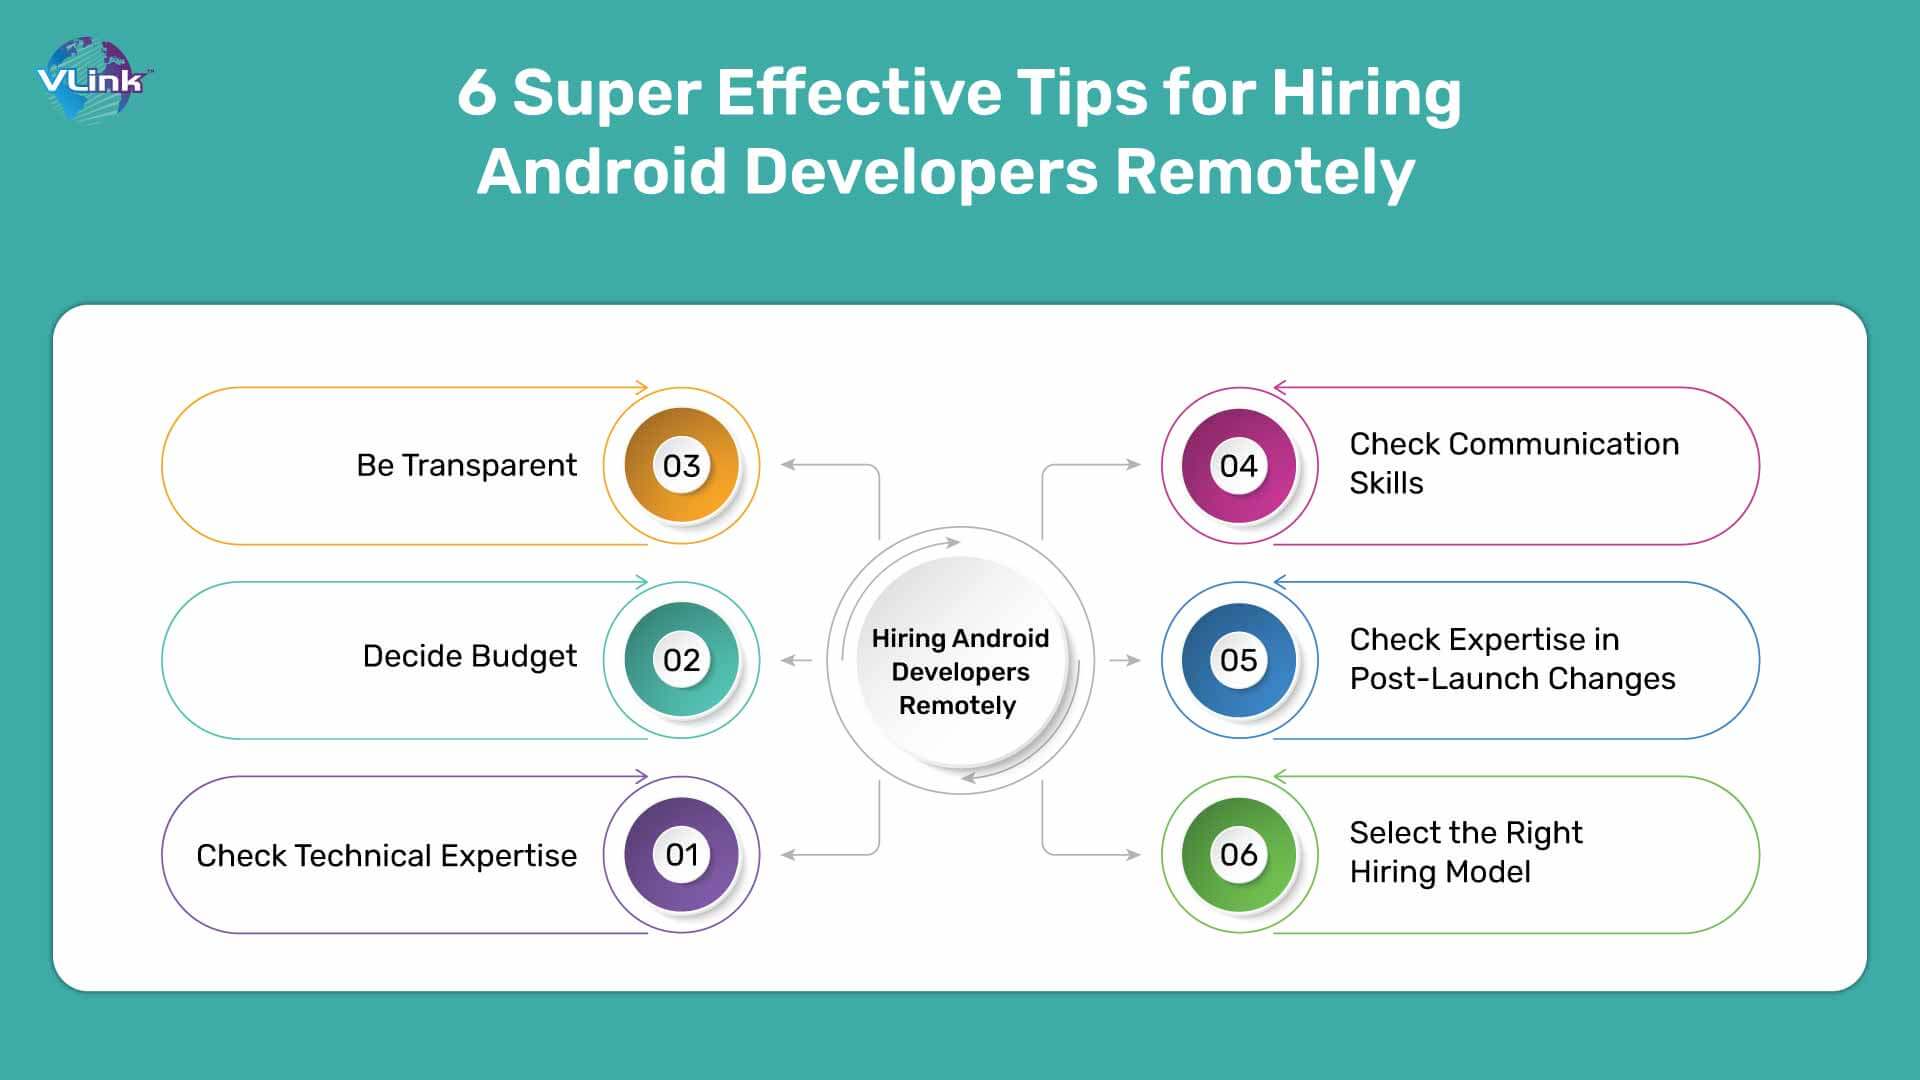 6 Super Effective Tips for Hiring Android Developers Remotely